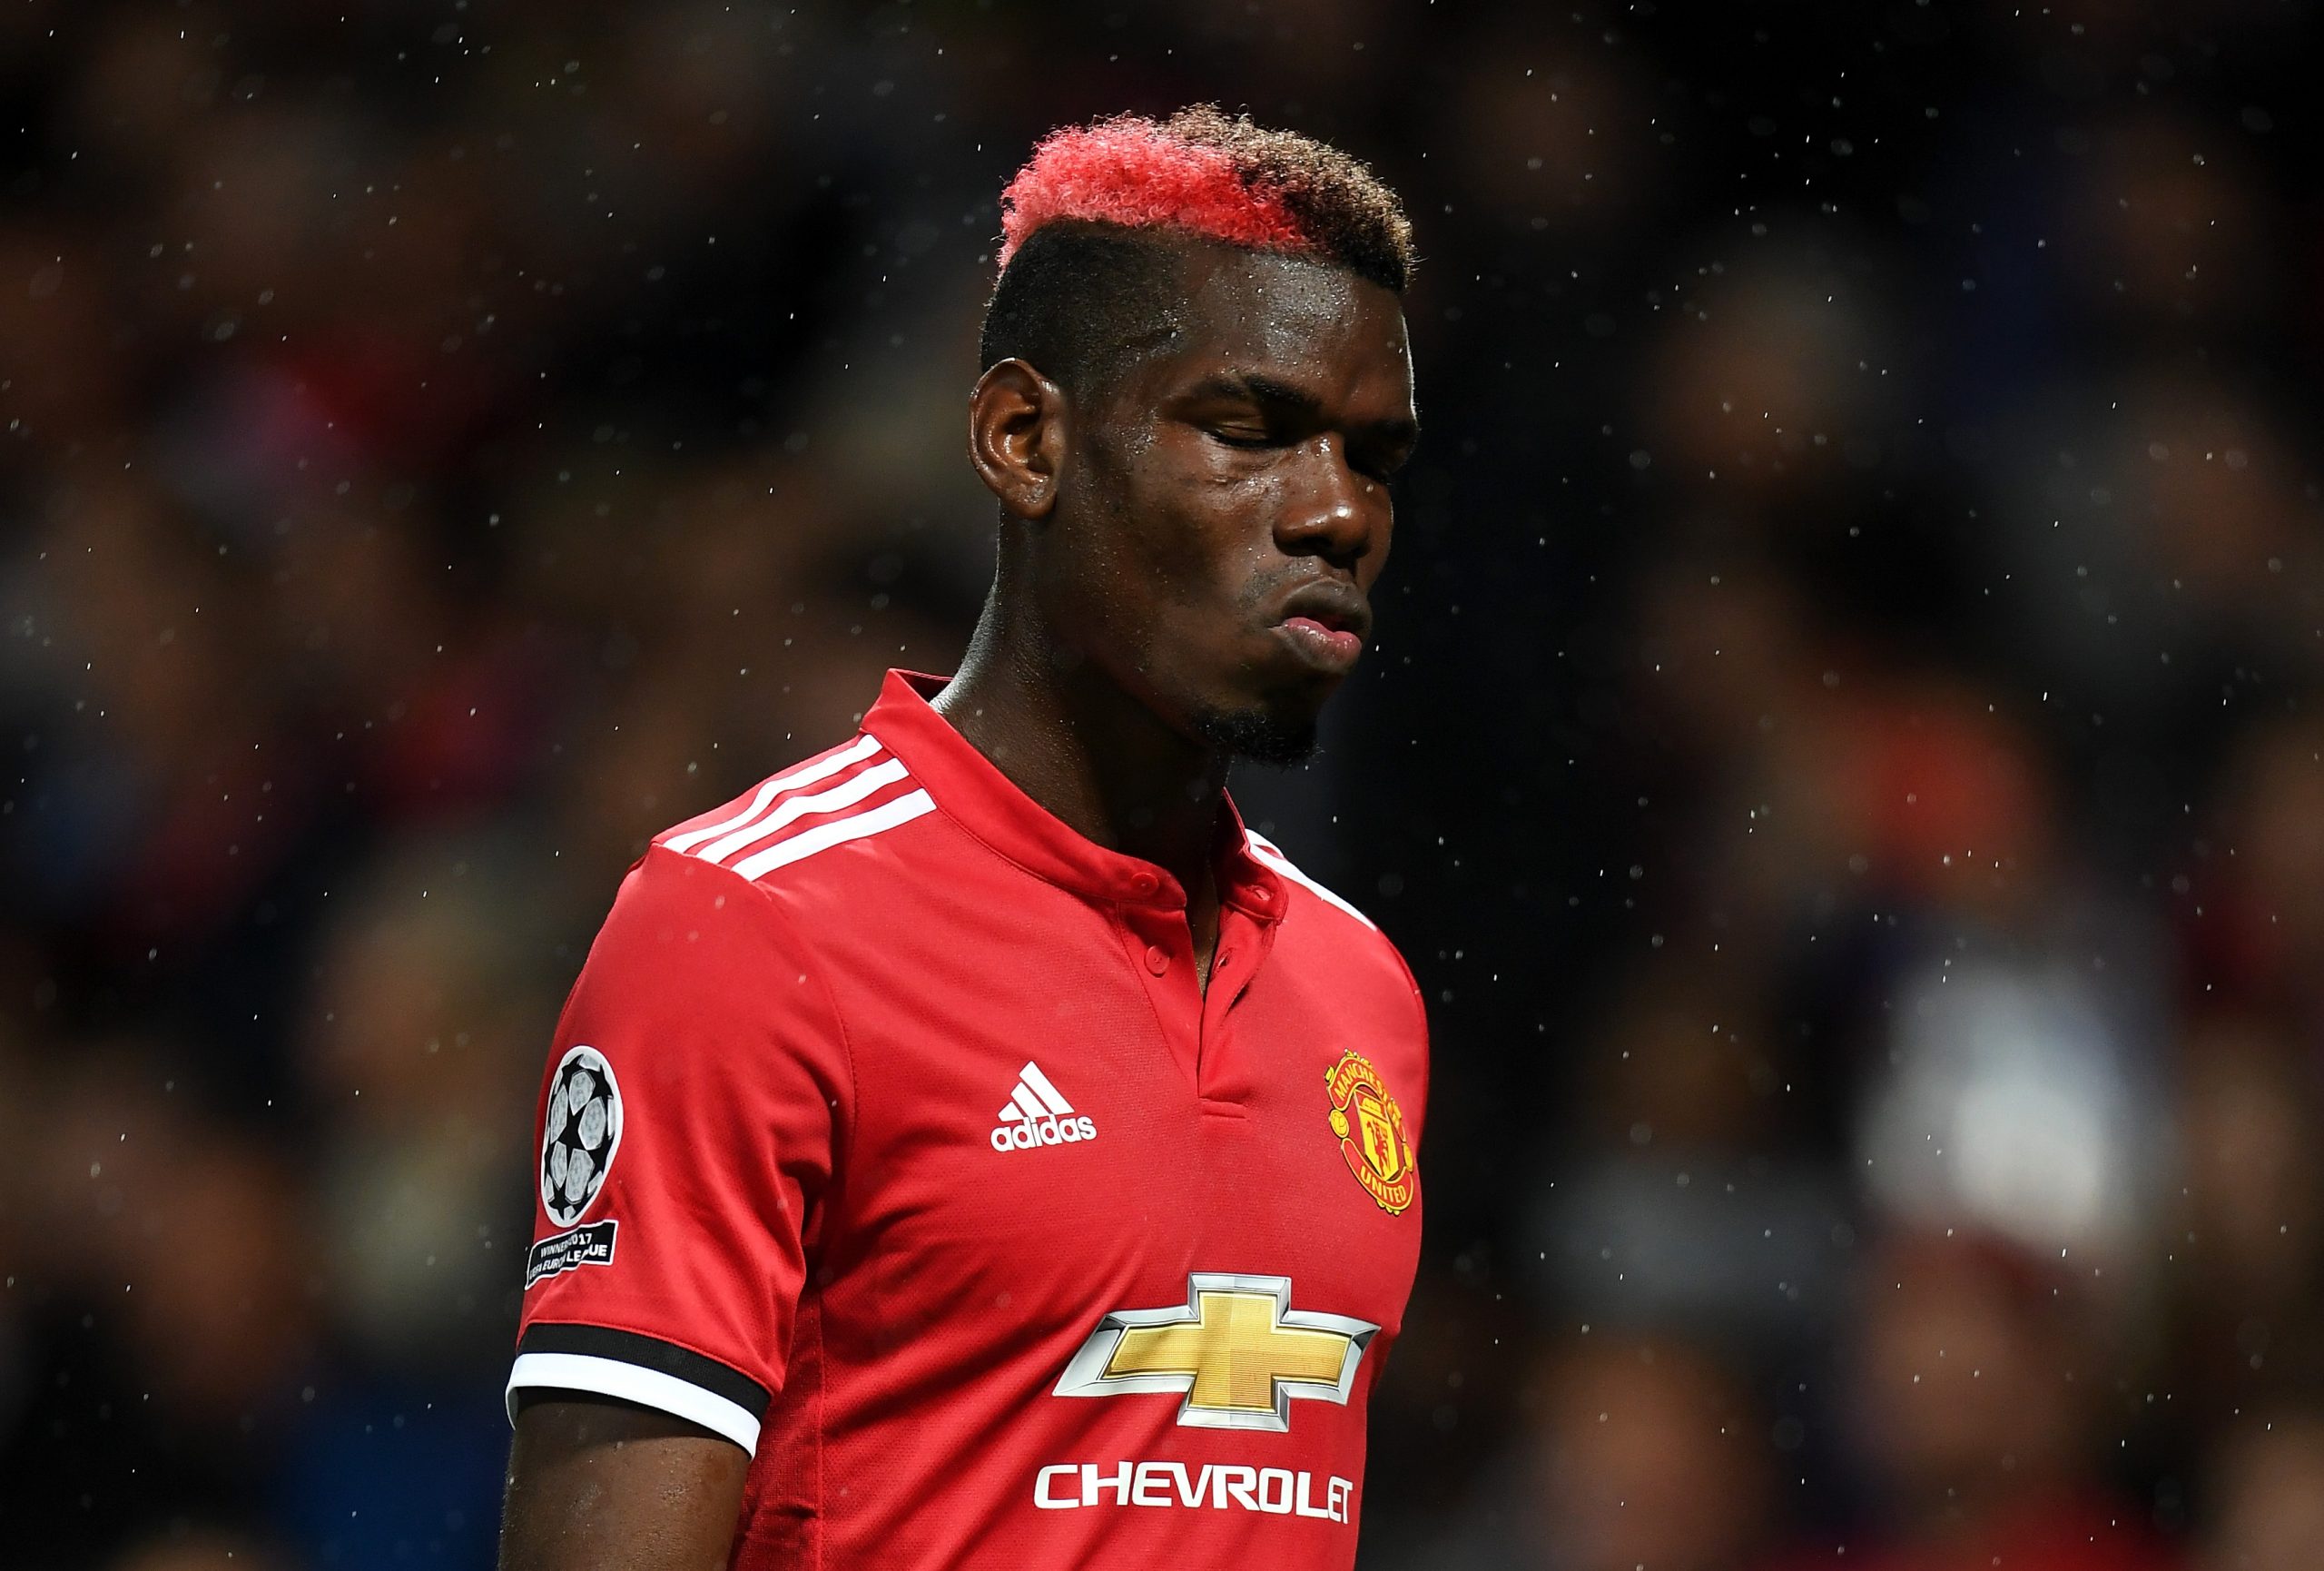 Could Paul Pogba leave Manchester United for Juventus?